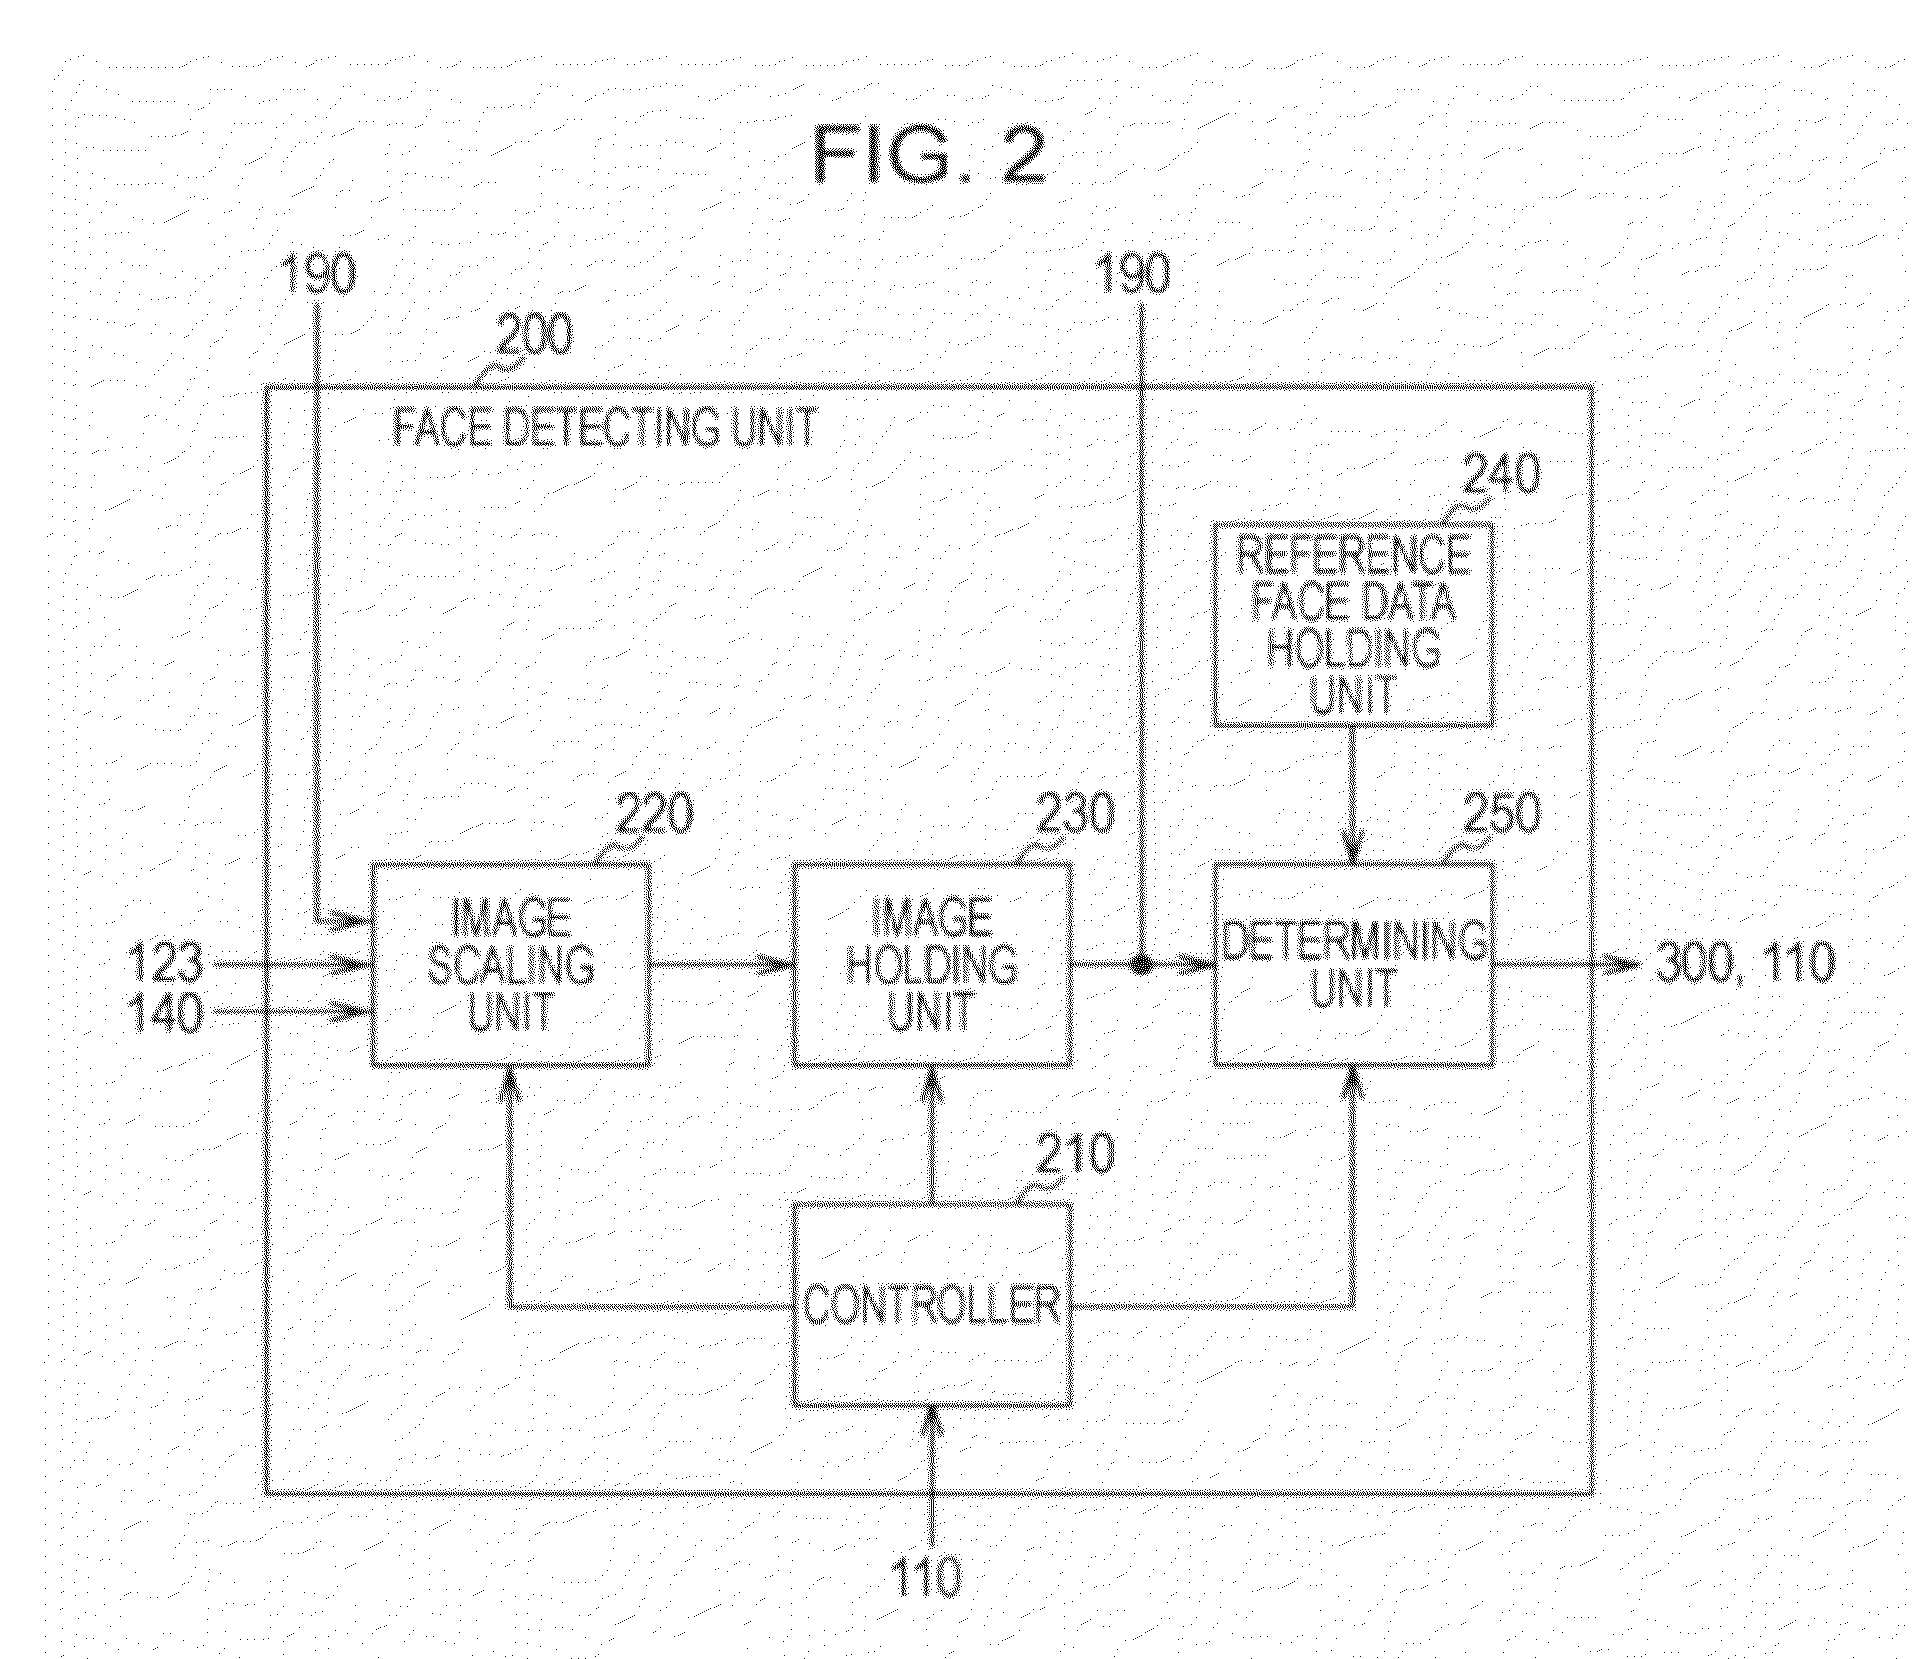 Image processing apparatus and associated methodology for facial recognition